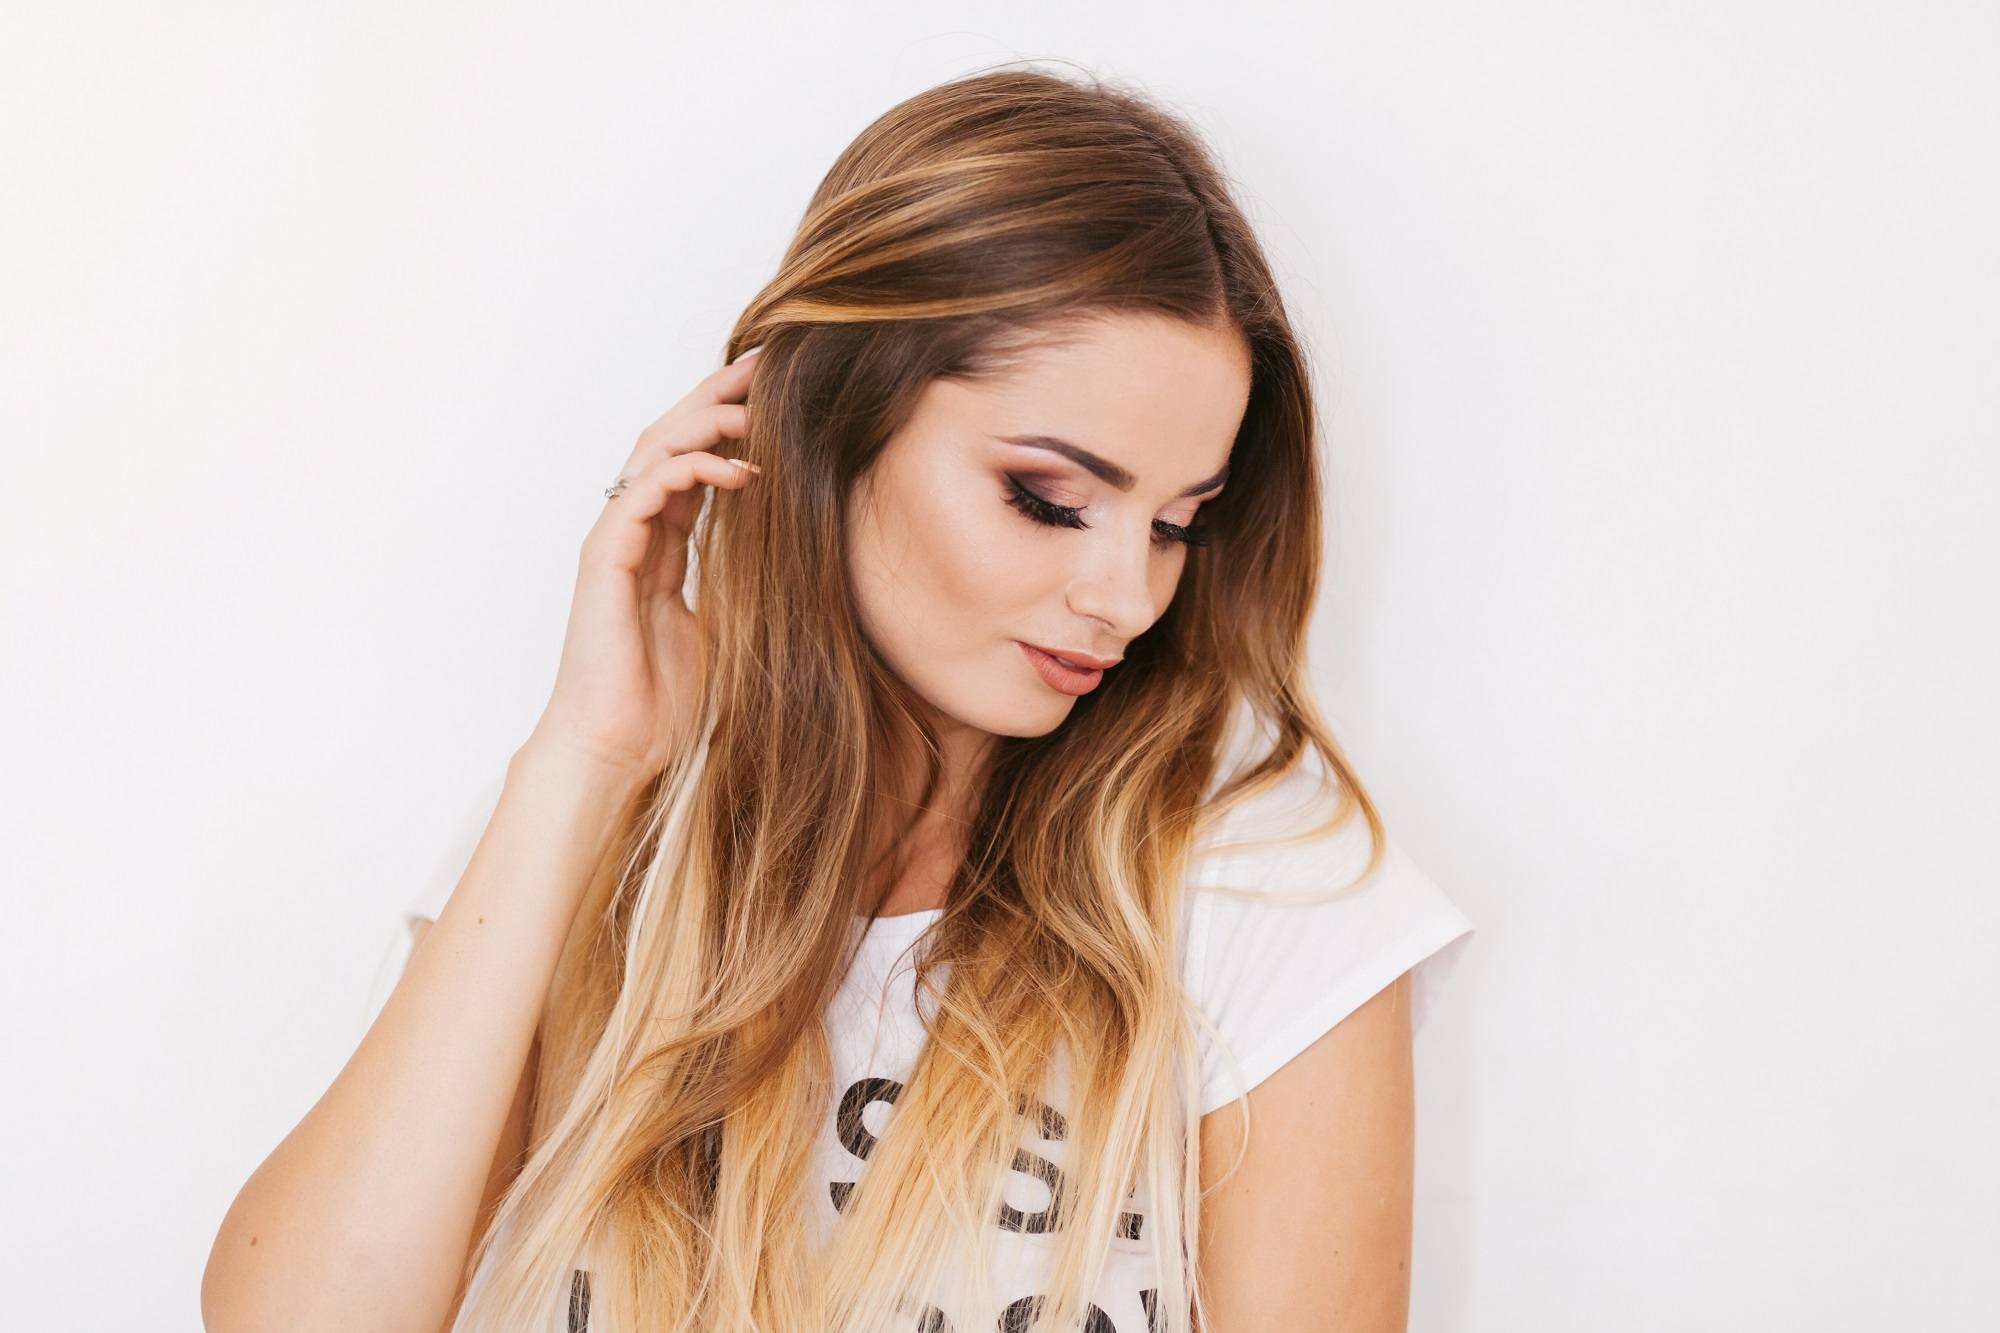 Brown ombre hair: Woman wearing a white shirt with brown ombre hear looking at the side